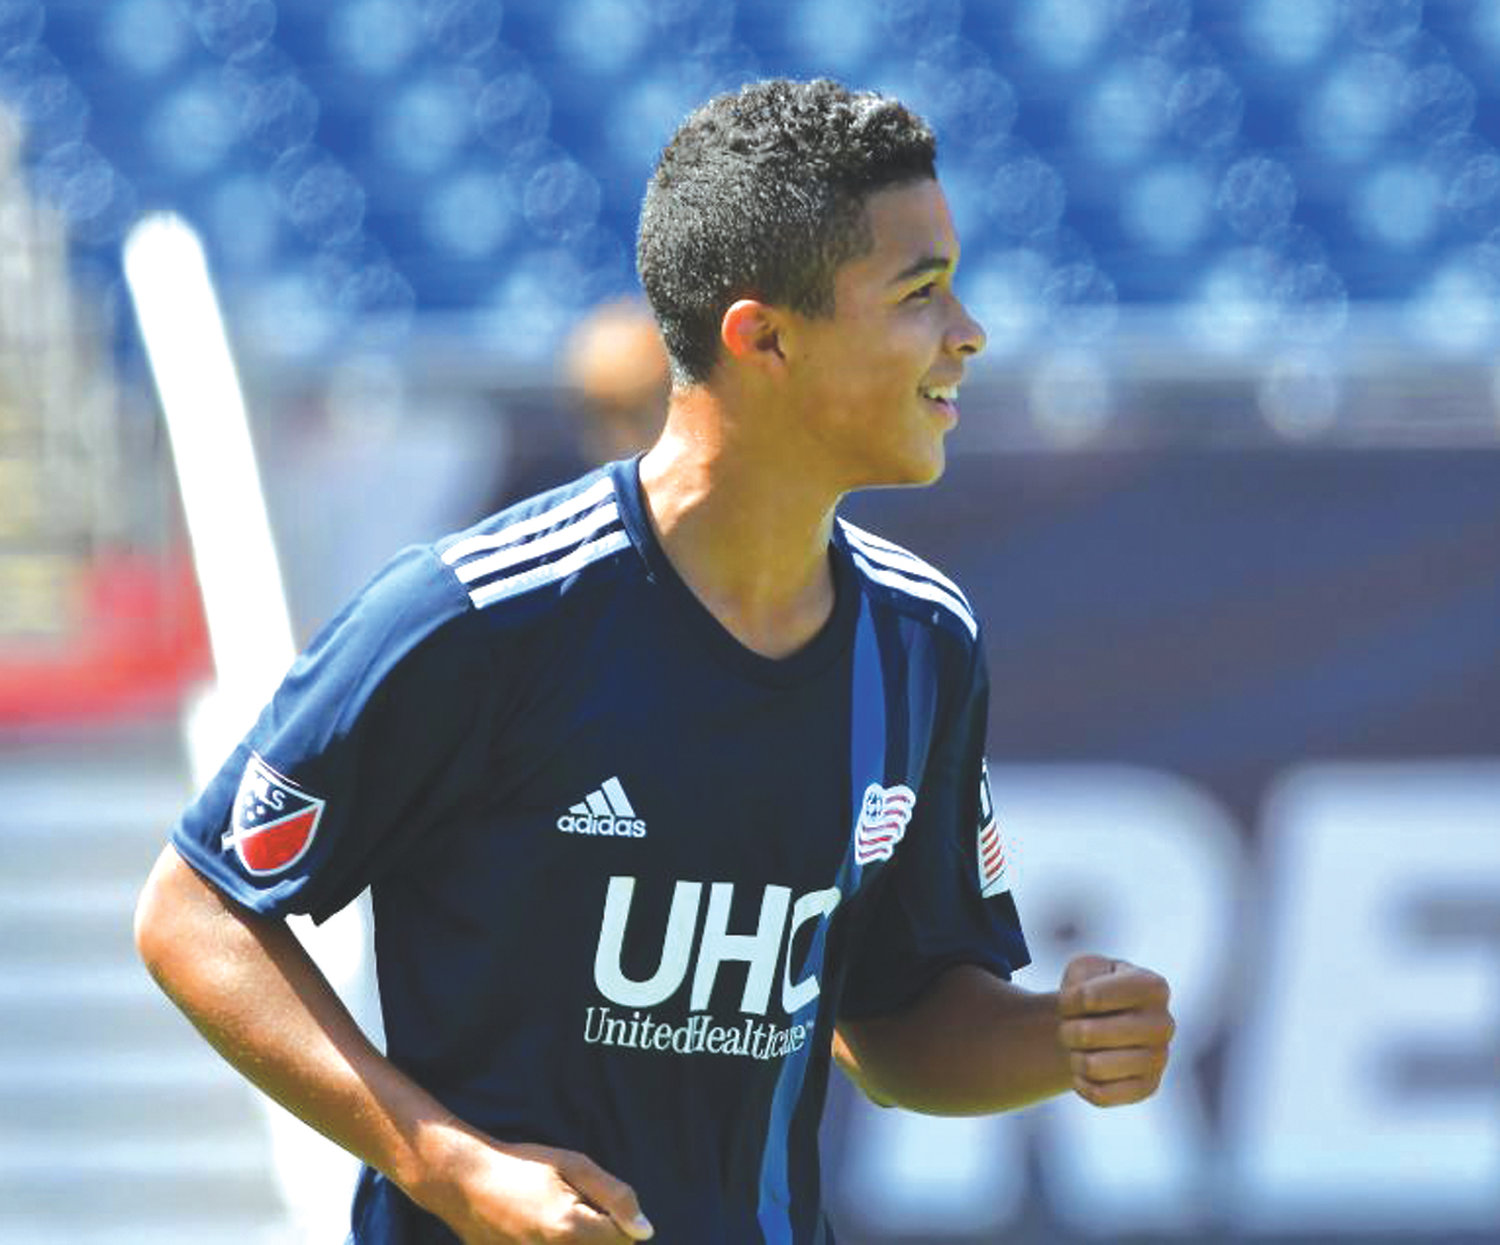 NEW KID IN TOWN: Cranston native Damian Rivera during his time with the New England Revolution Academy, a youth development camp which helps prepare young soccer prospects for the professional game. Rivera, 17, is set to begin his professional career with the big club this season after signing a homegrown contract last November. He is the youngest player currently on the Revolution roster and is the second Rhode Island native to join the team.